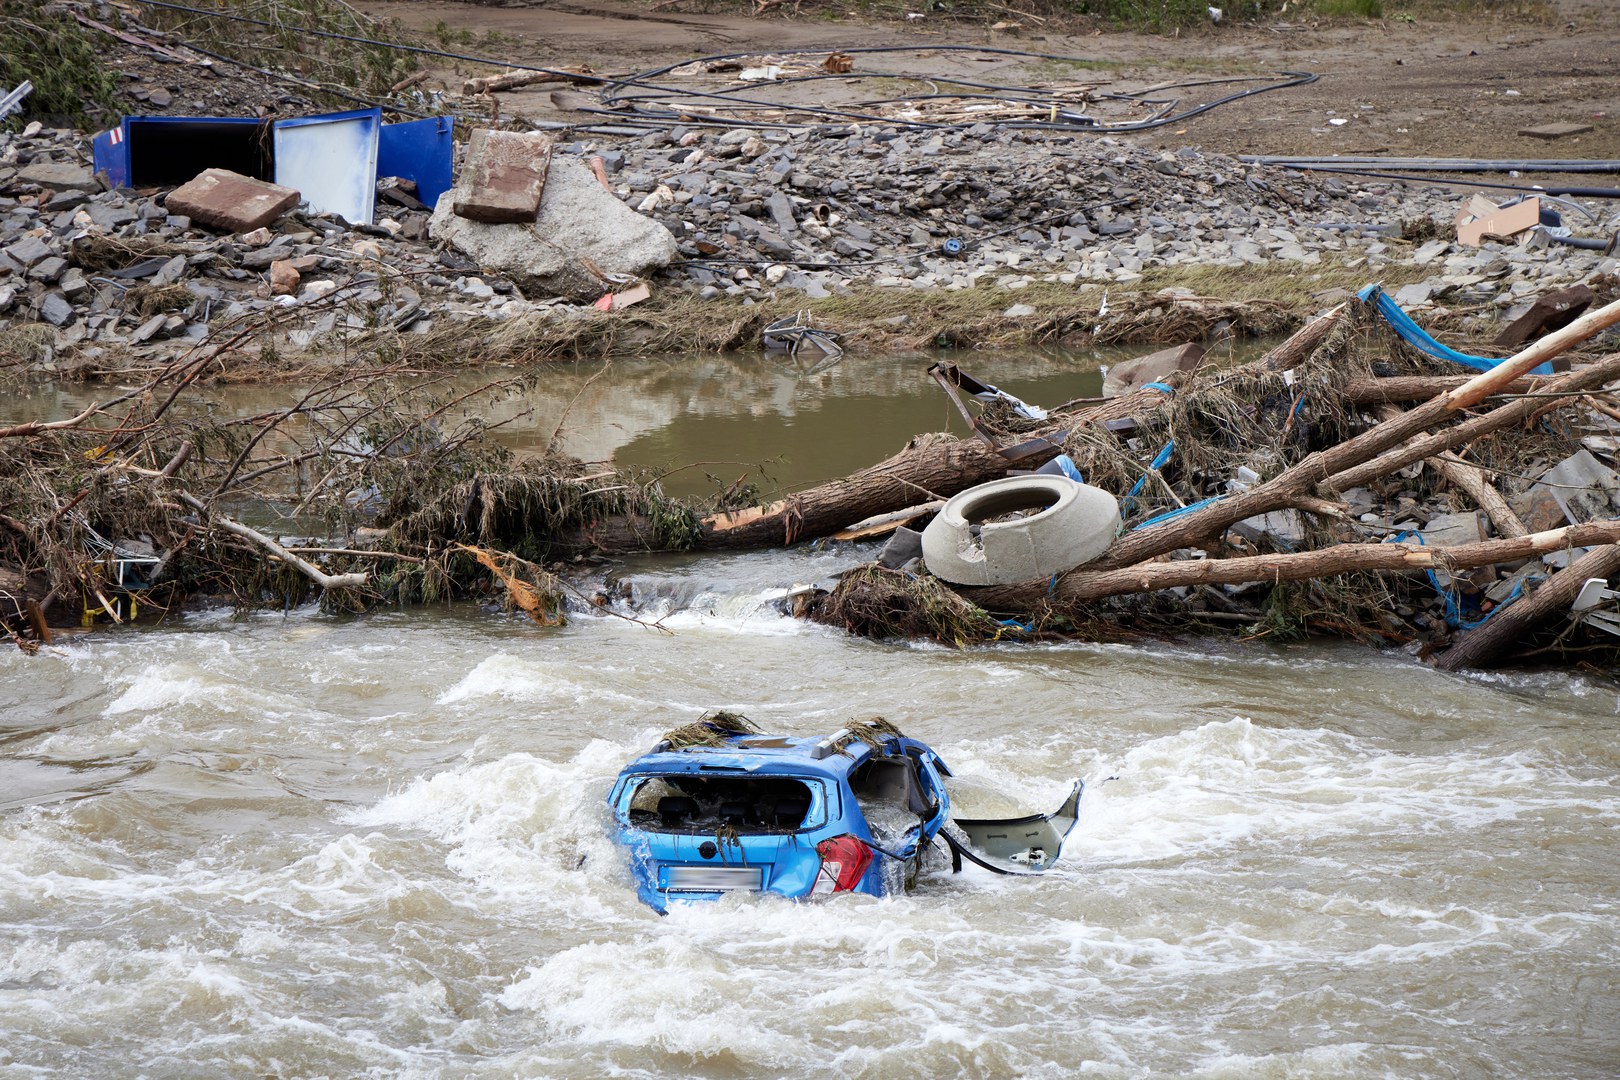 Cars, roads and infrastructure were swept away by the Ahr river